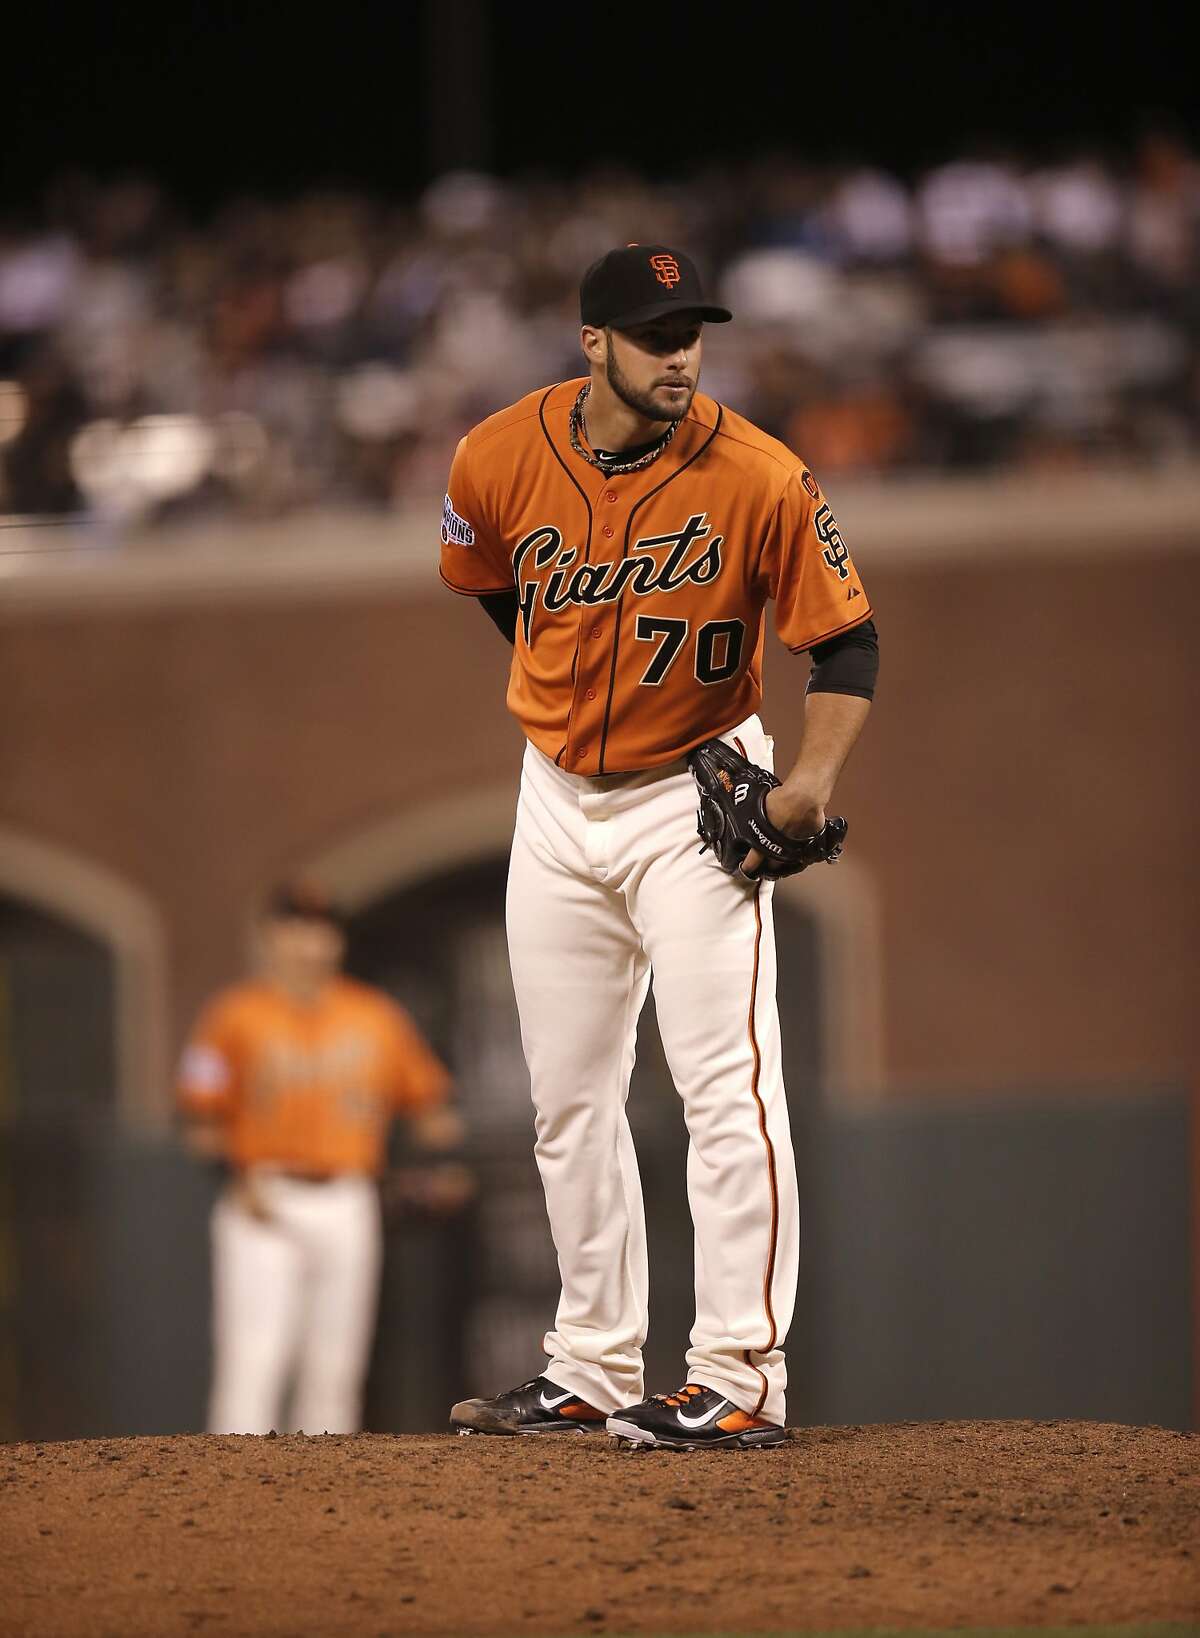 Giants' pitcher George Kontos, 70 looks in for the signs as he throws in the seventh inning, as the San Francisco Giants take on the Oakland Athletics at AT&T Park in San Francisco, Calif. on Fri. July 24, 2015.